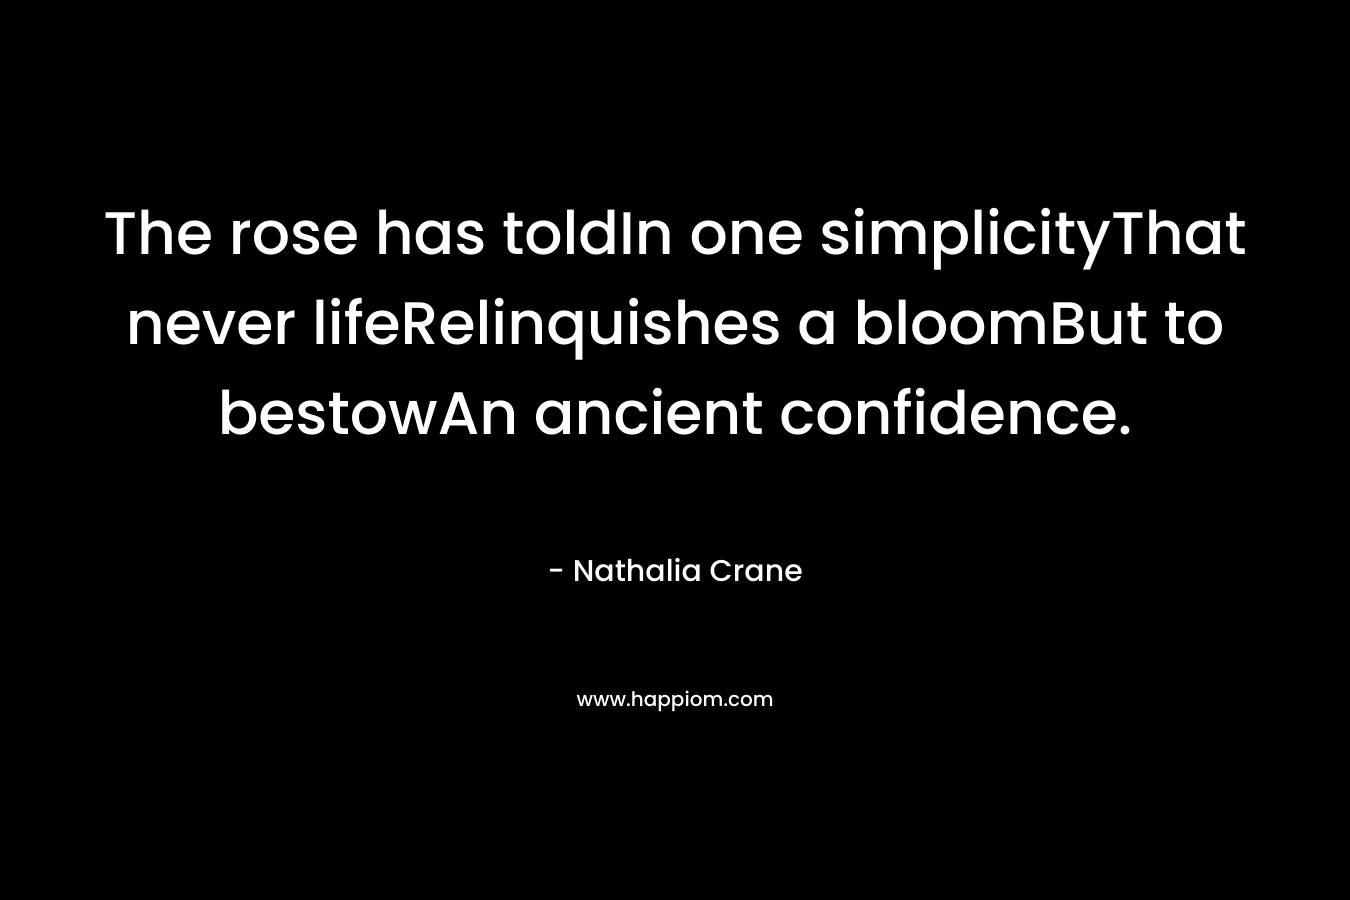 The rose has toldIn one simplicityThat never lifeRelinquishes a bloomBut to bestowAn ancient confidence. – Nathalia Crane